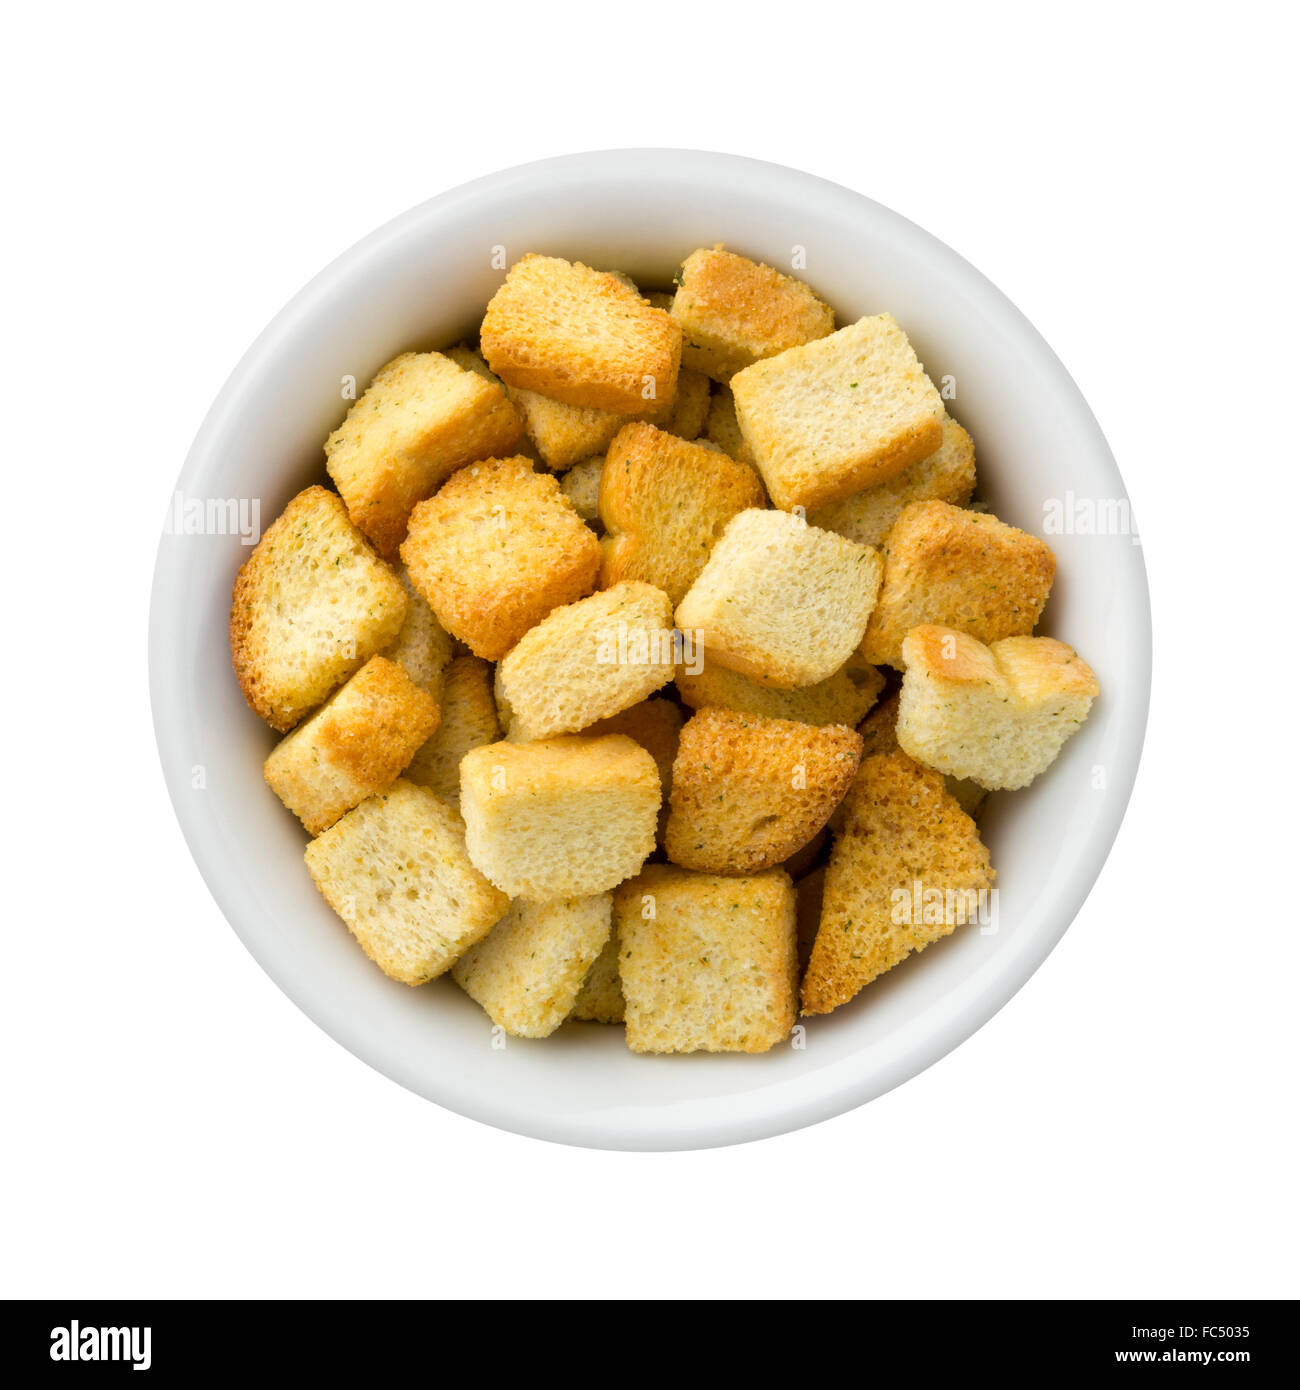 Croutons in a Ceramic Bowl Stock Photo